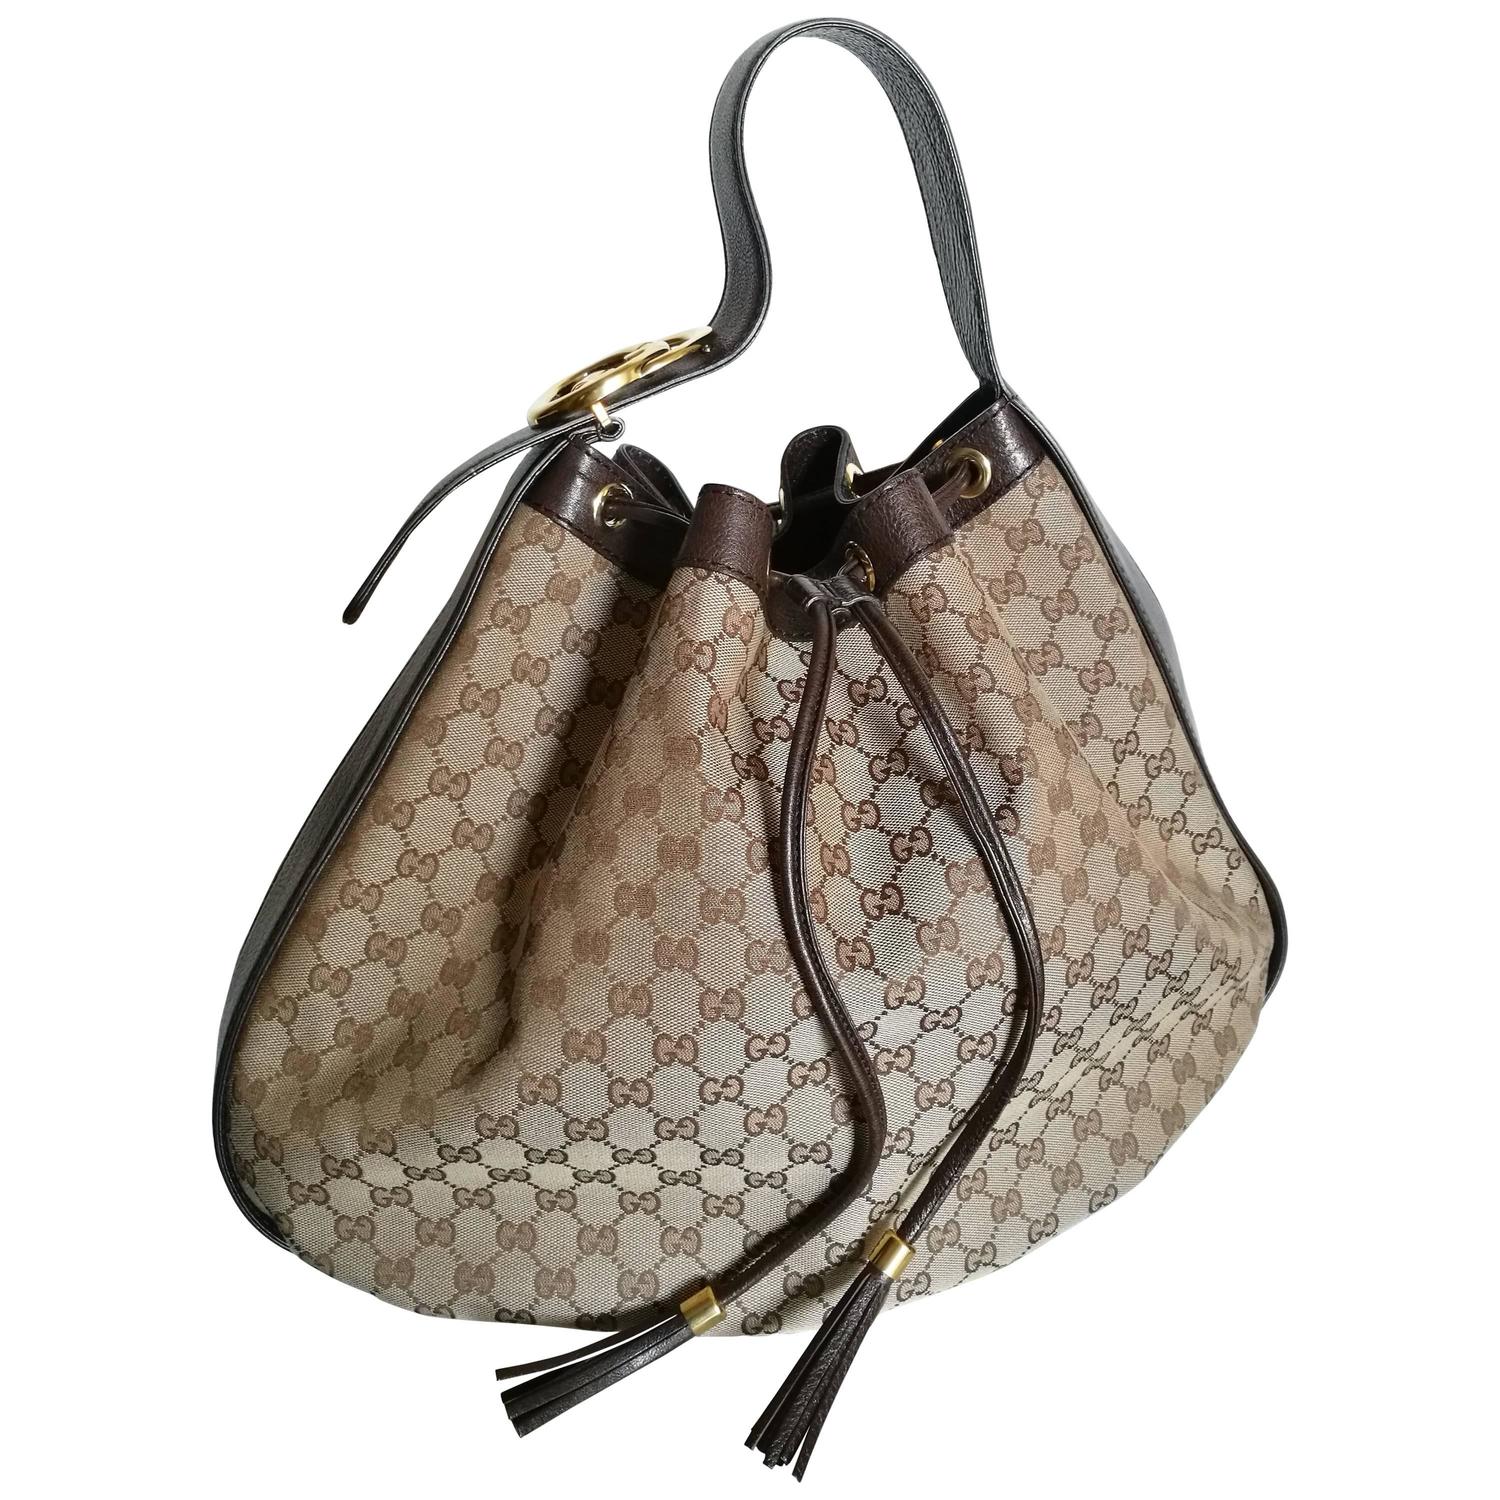 Replica Gucci Gg Monogram Handbags | Confederated Tribes of the Umatilla Indian Reservation